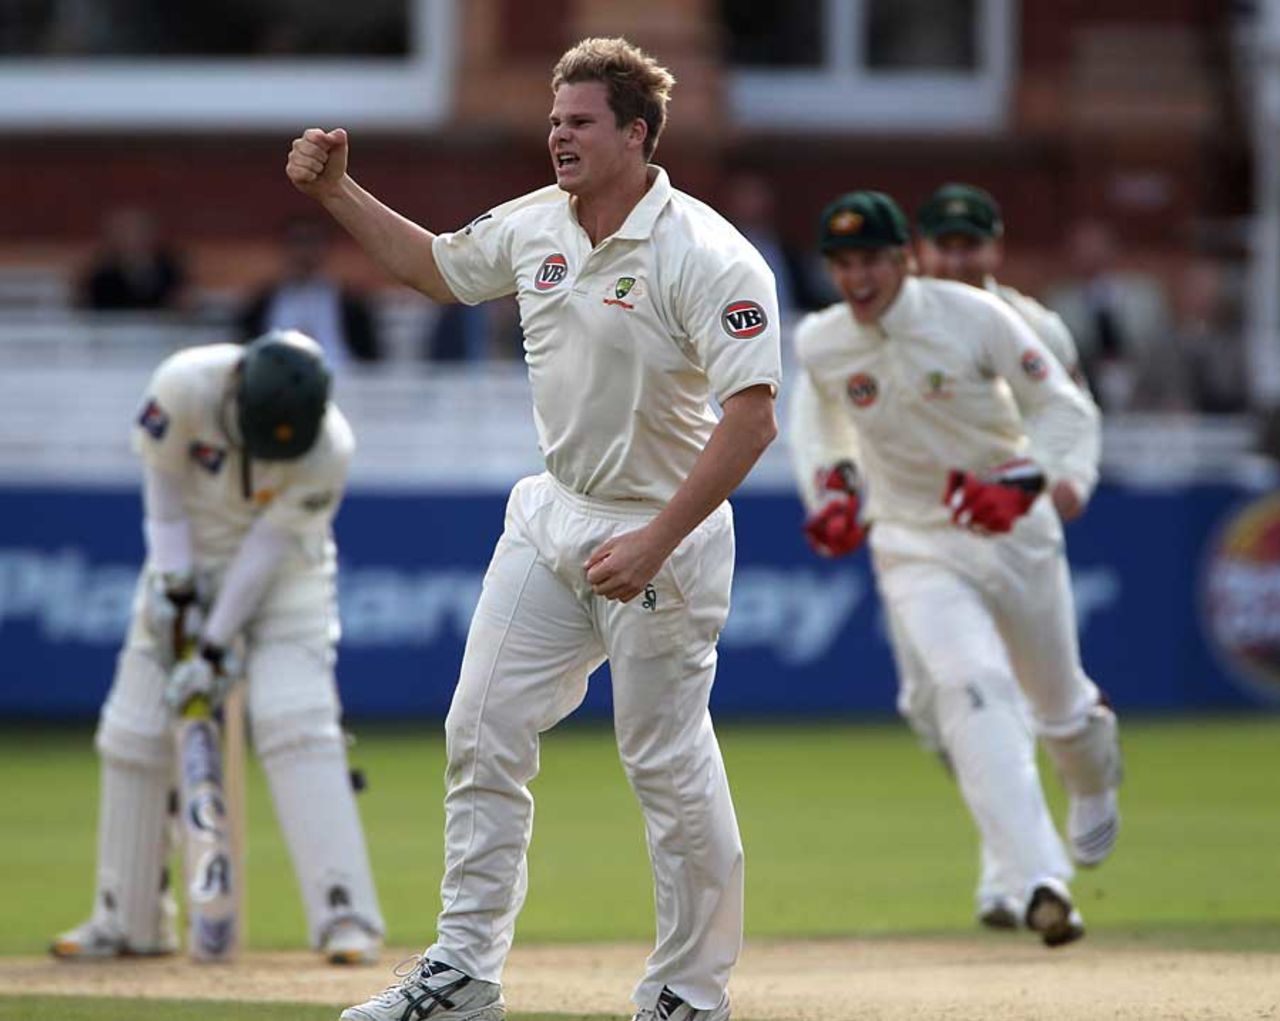 Steven Smith picked up his first Test wicket when Imran Farhat pulled to midwicket, Pakistan v Australia, 1st Test, Lord's, July 15, 2010